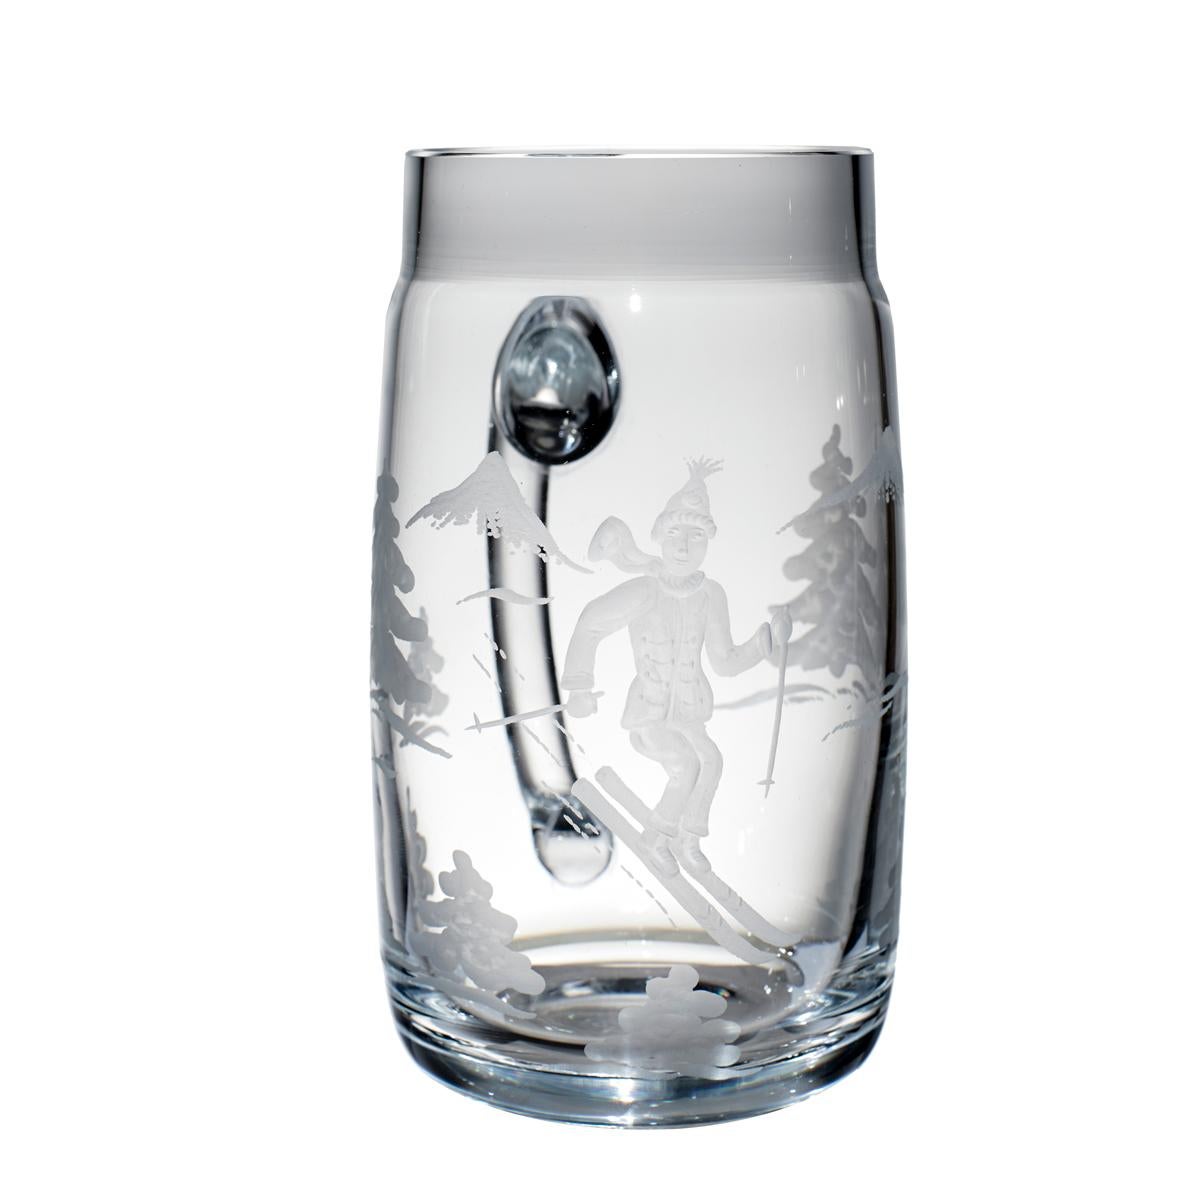 Set of six beer glass called Bierseidl in clear crystal glass. Hand blown in Bavaria and hand-engraved with trees and a skier boy in the style of Black Forest. For 0.7 liter beer. Can be ordered per one or as a set with six.